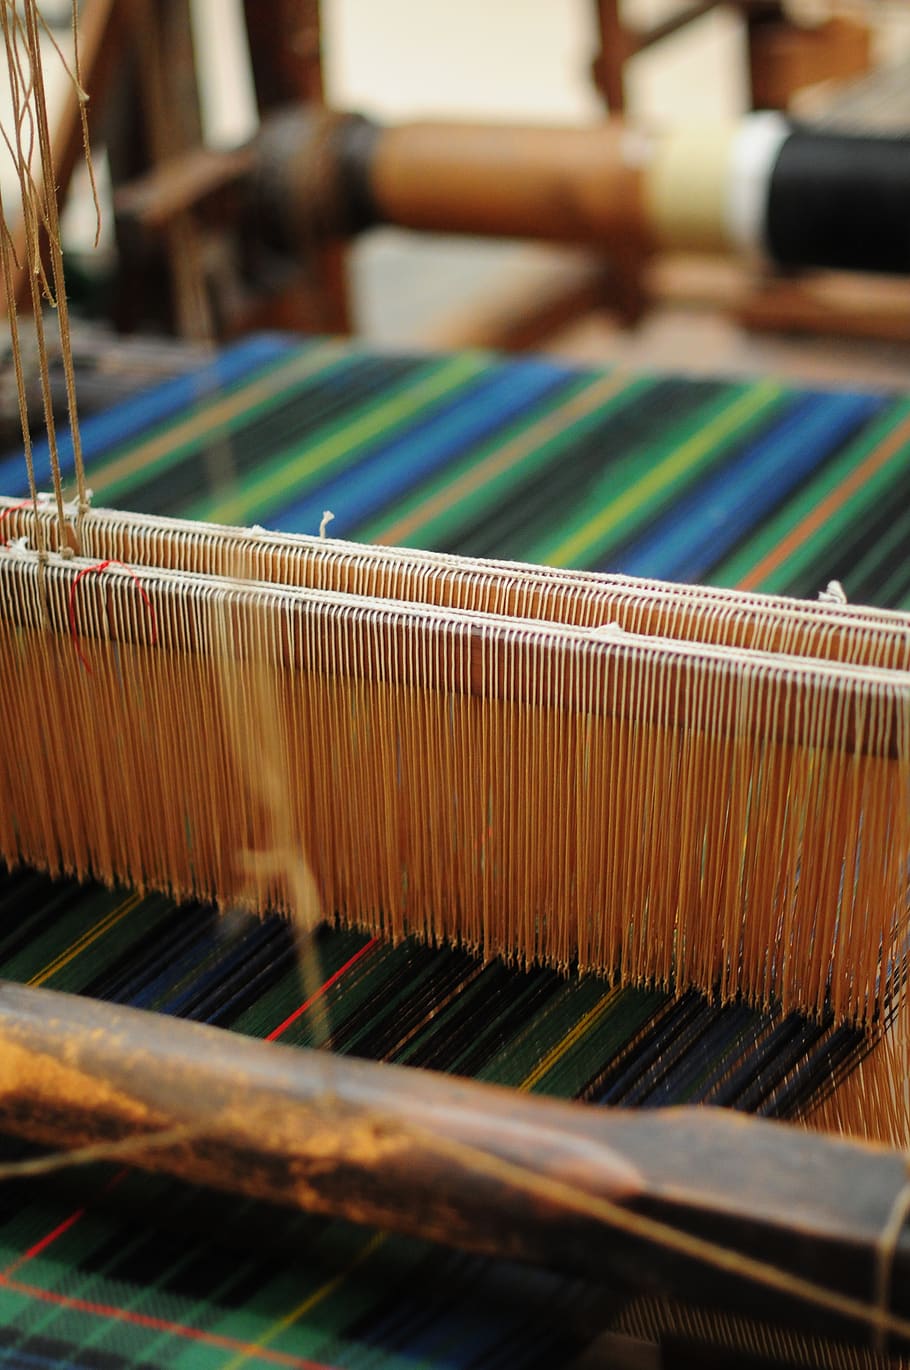 weaving, sewing, craft, fabric, textile, cotton, thread, weave, design, material